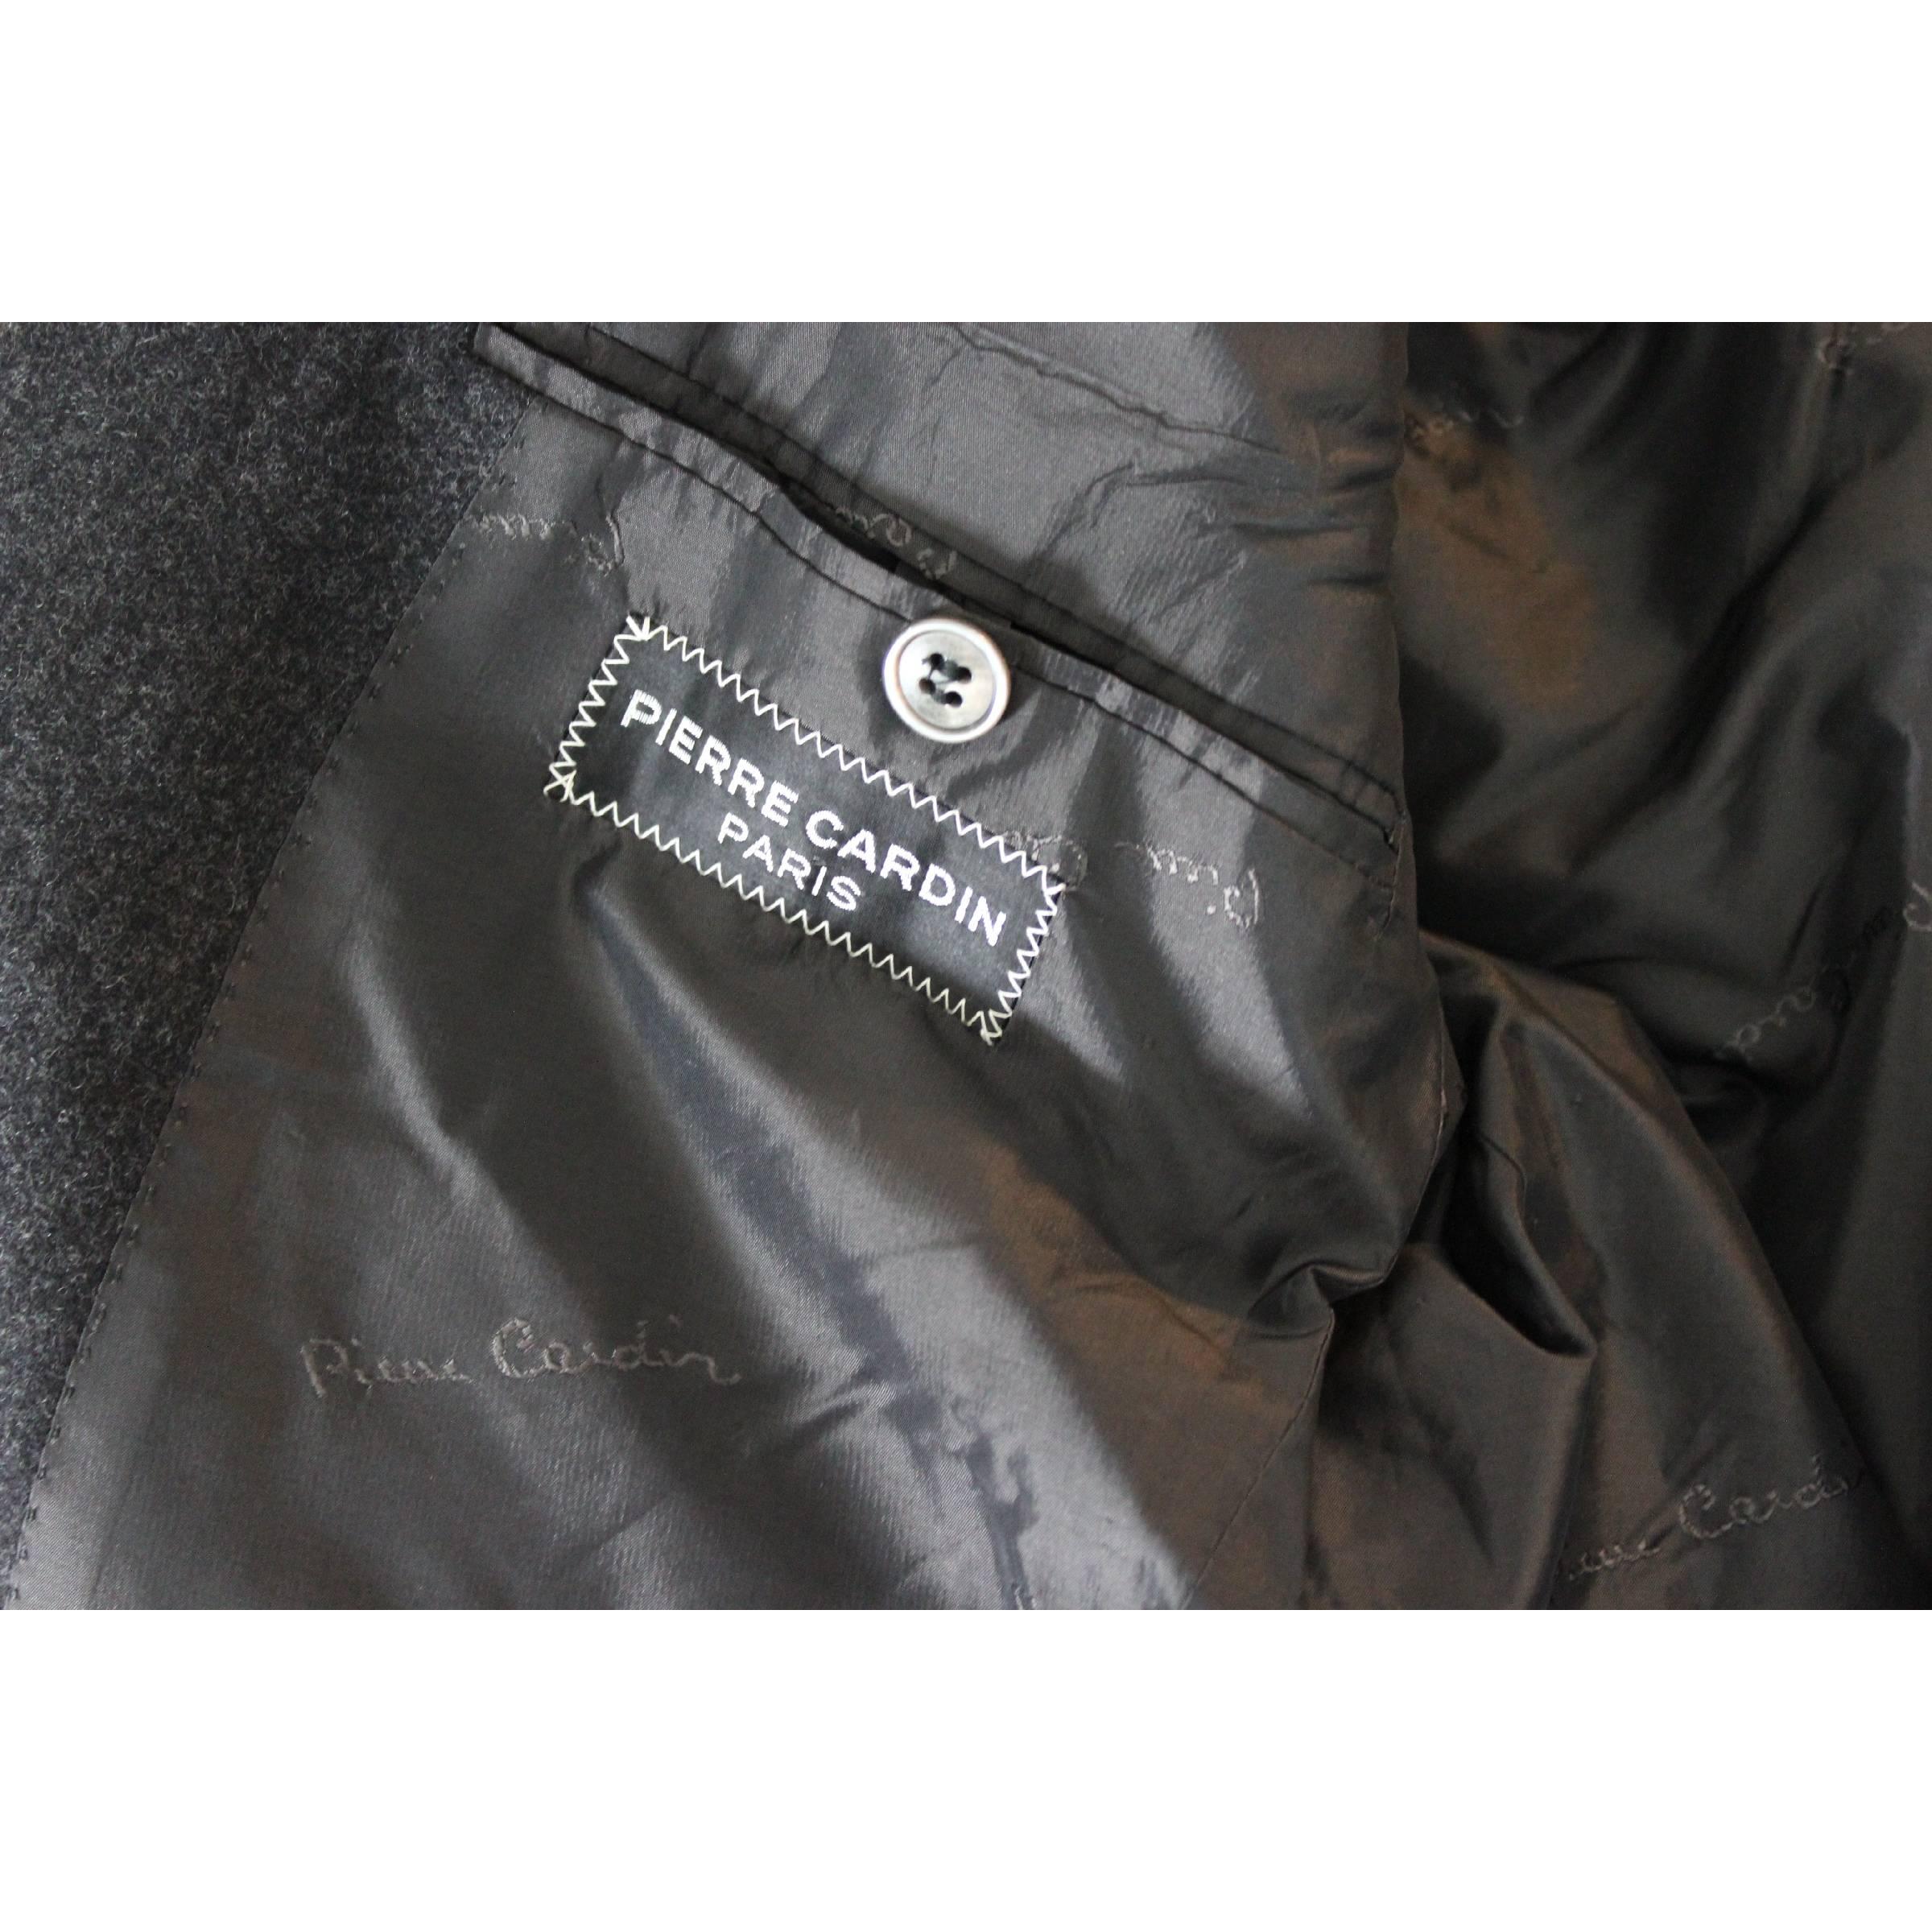 Pierre Cardin Suit Pants Gray and Black Wool France Smoking, 1990s For Sale 6